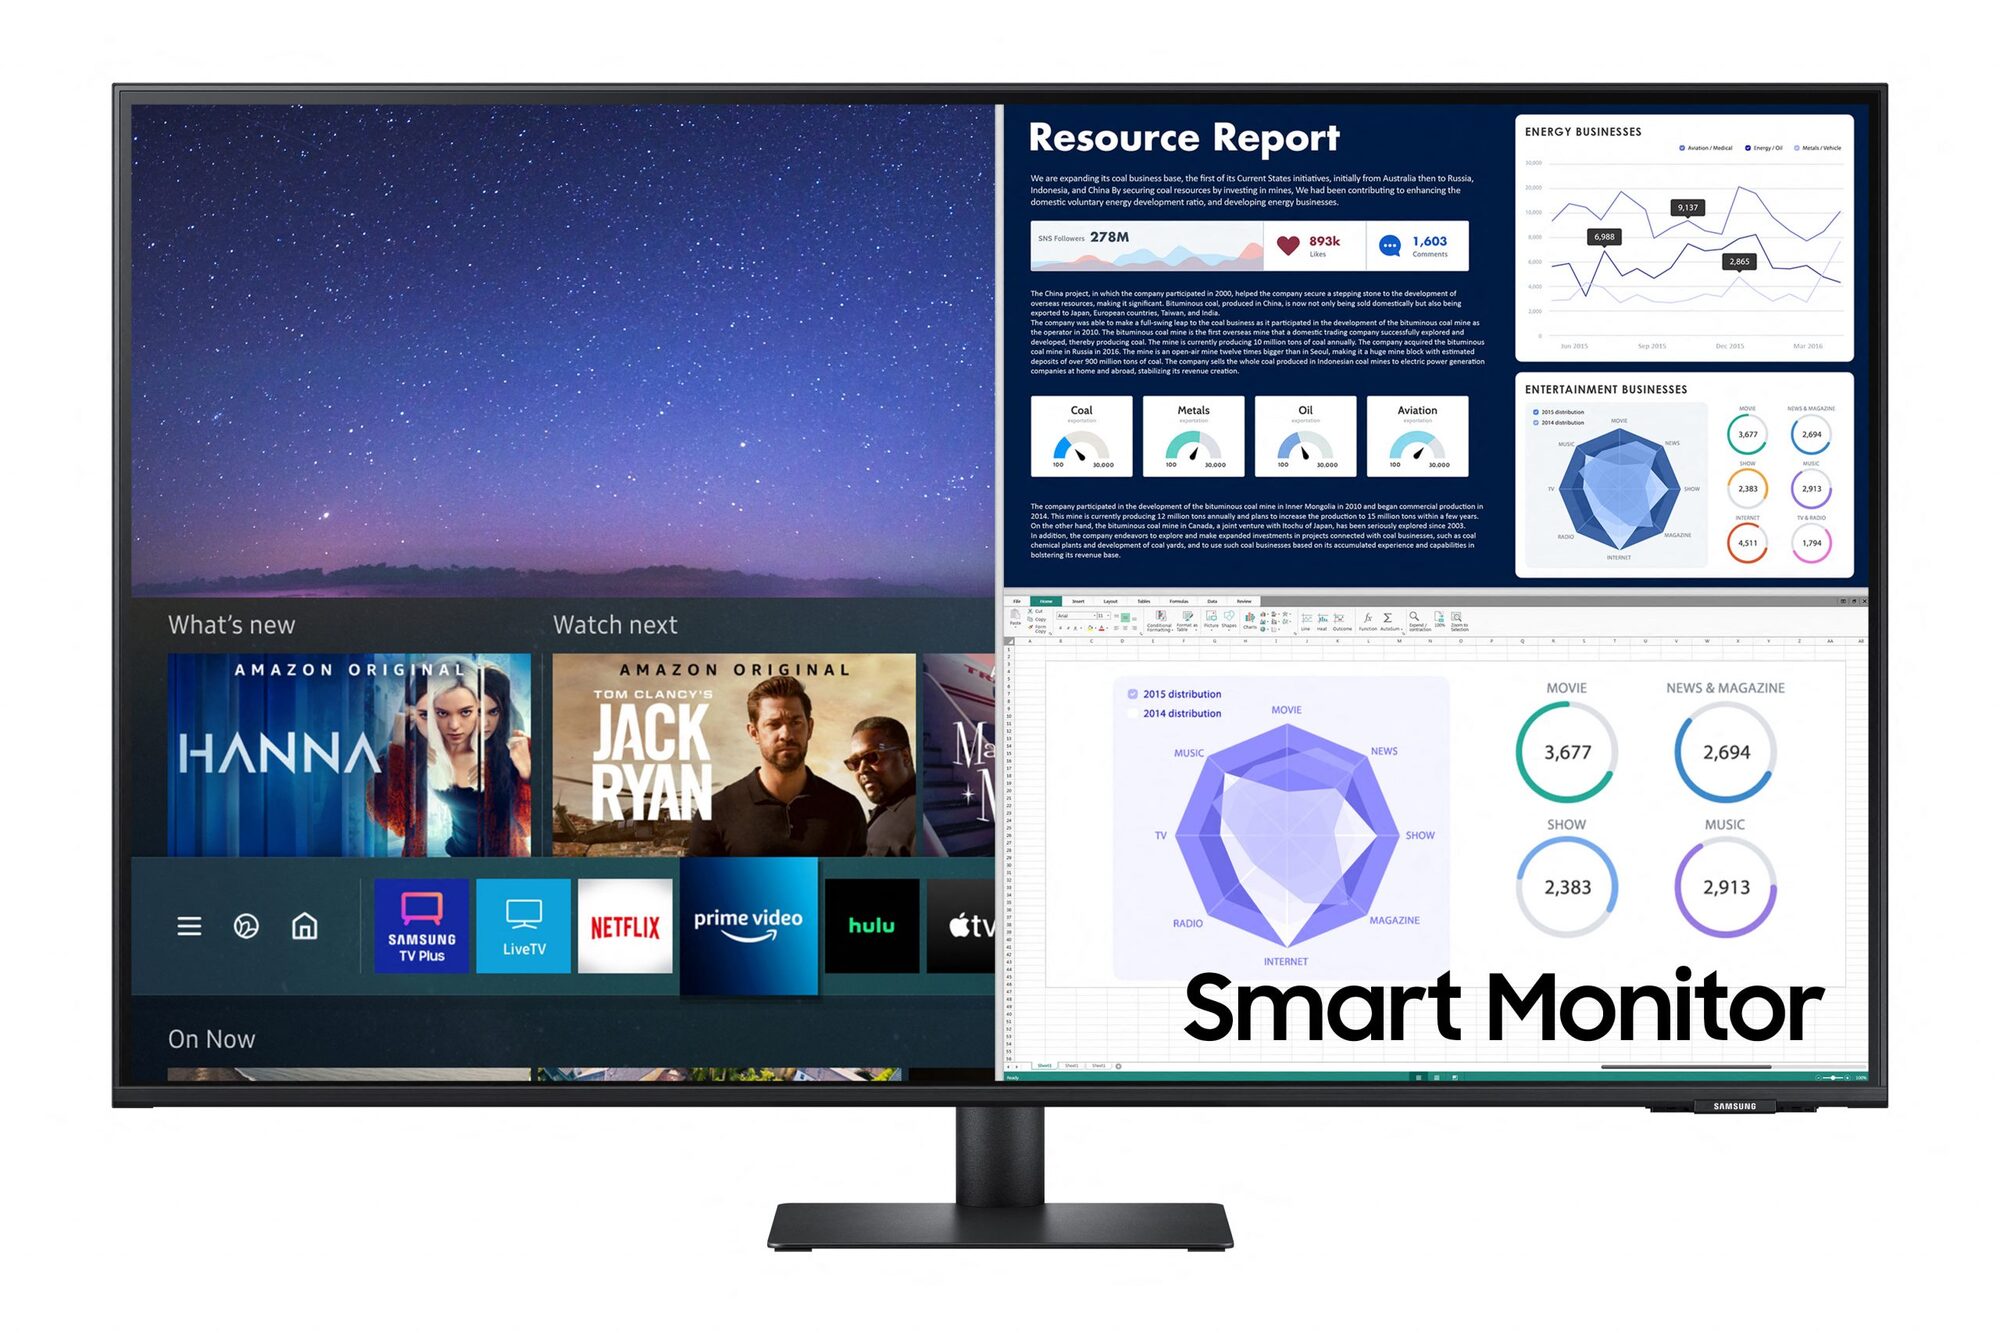 Samsung M7 Series 43” LS43BM700UUXUF - why so cheap? Smart-Monitor-M7-43in-scaled.jpg